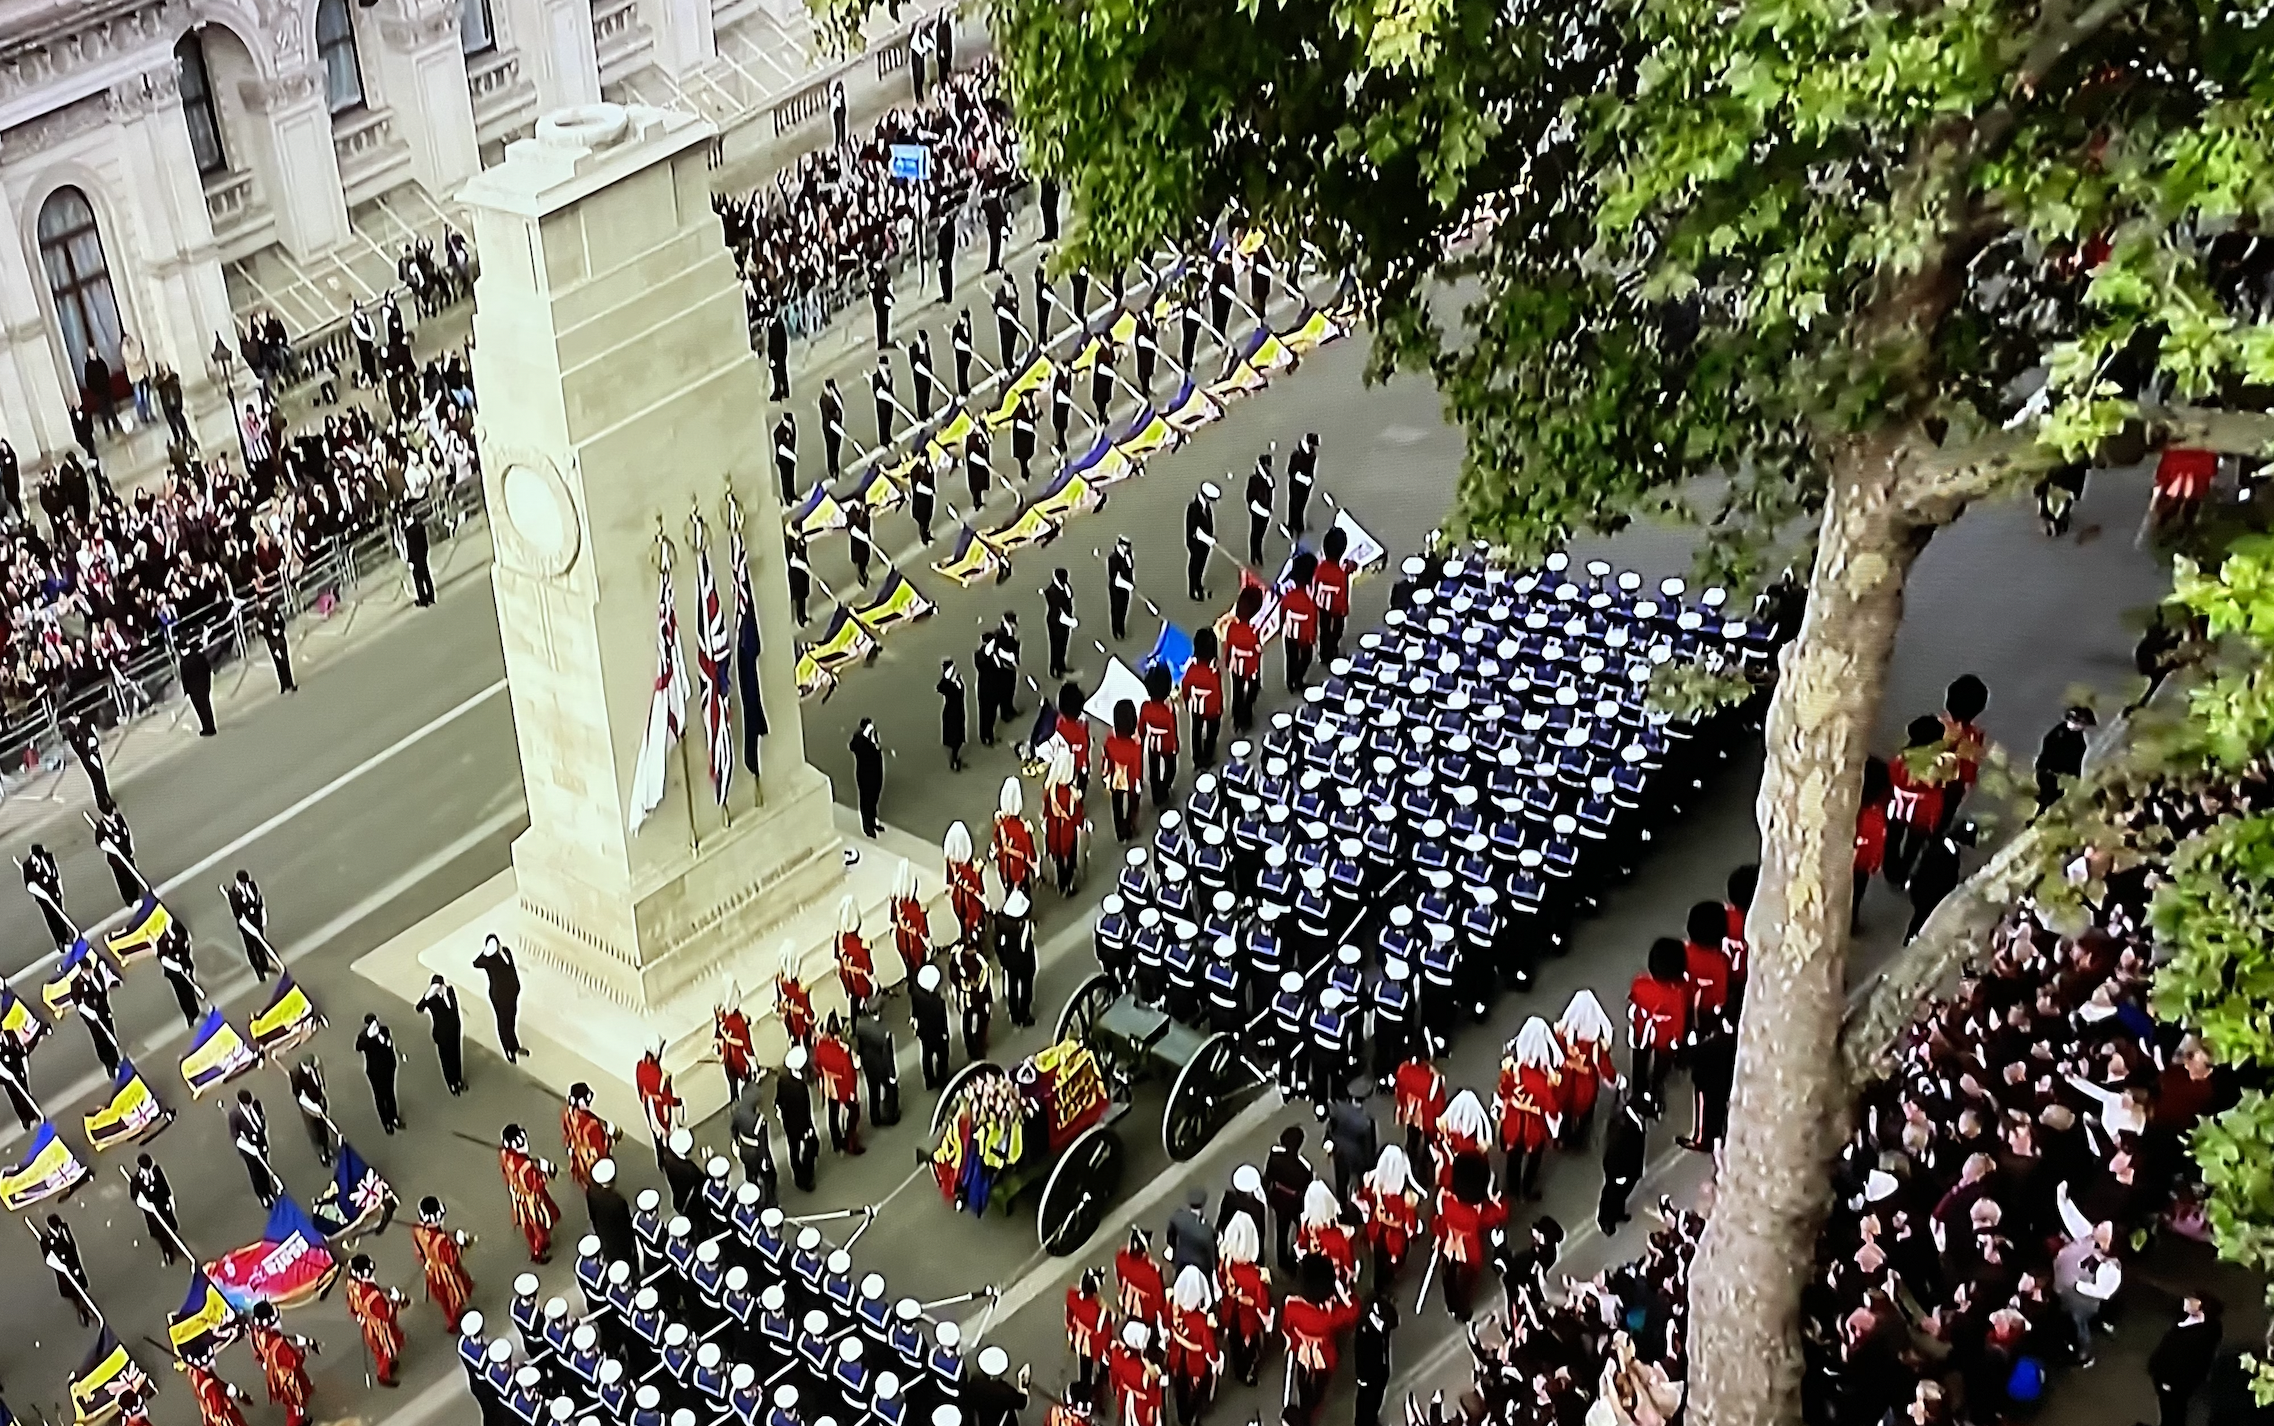 Queen's coffin procession passing the Epitah.